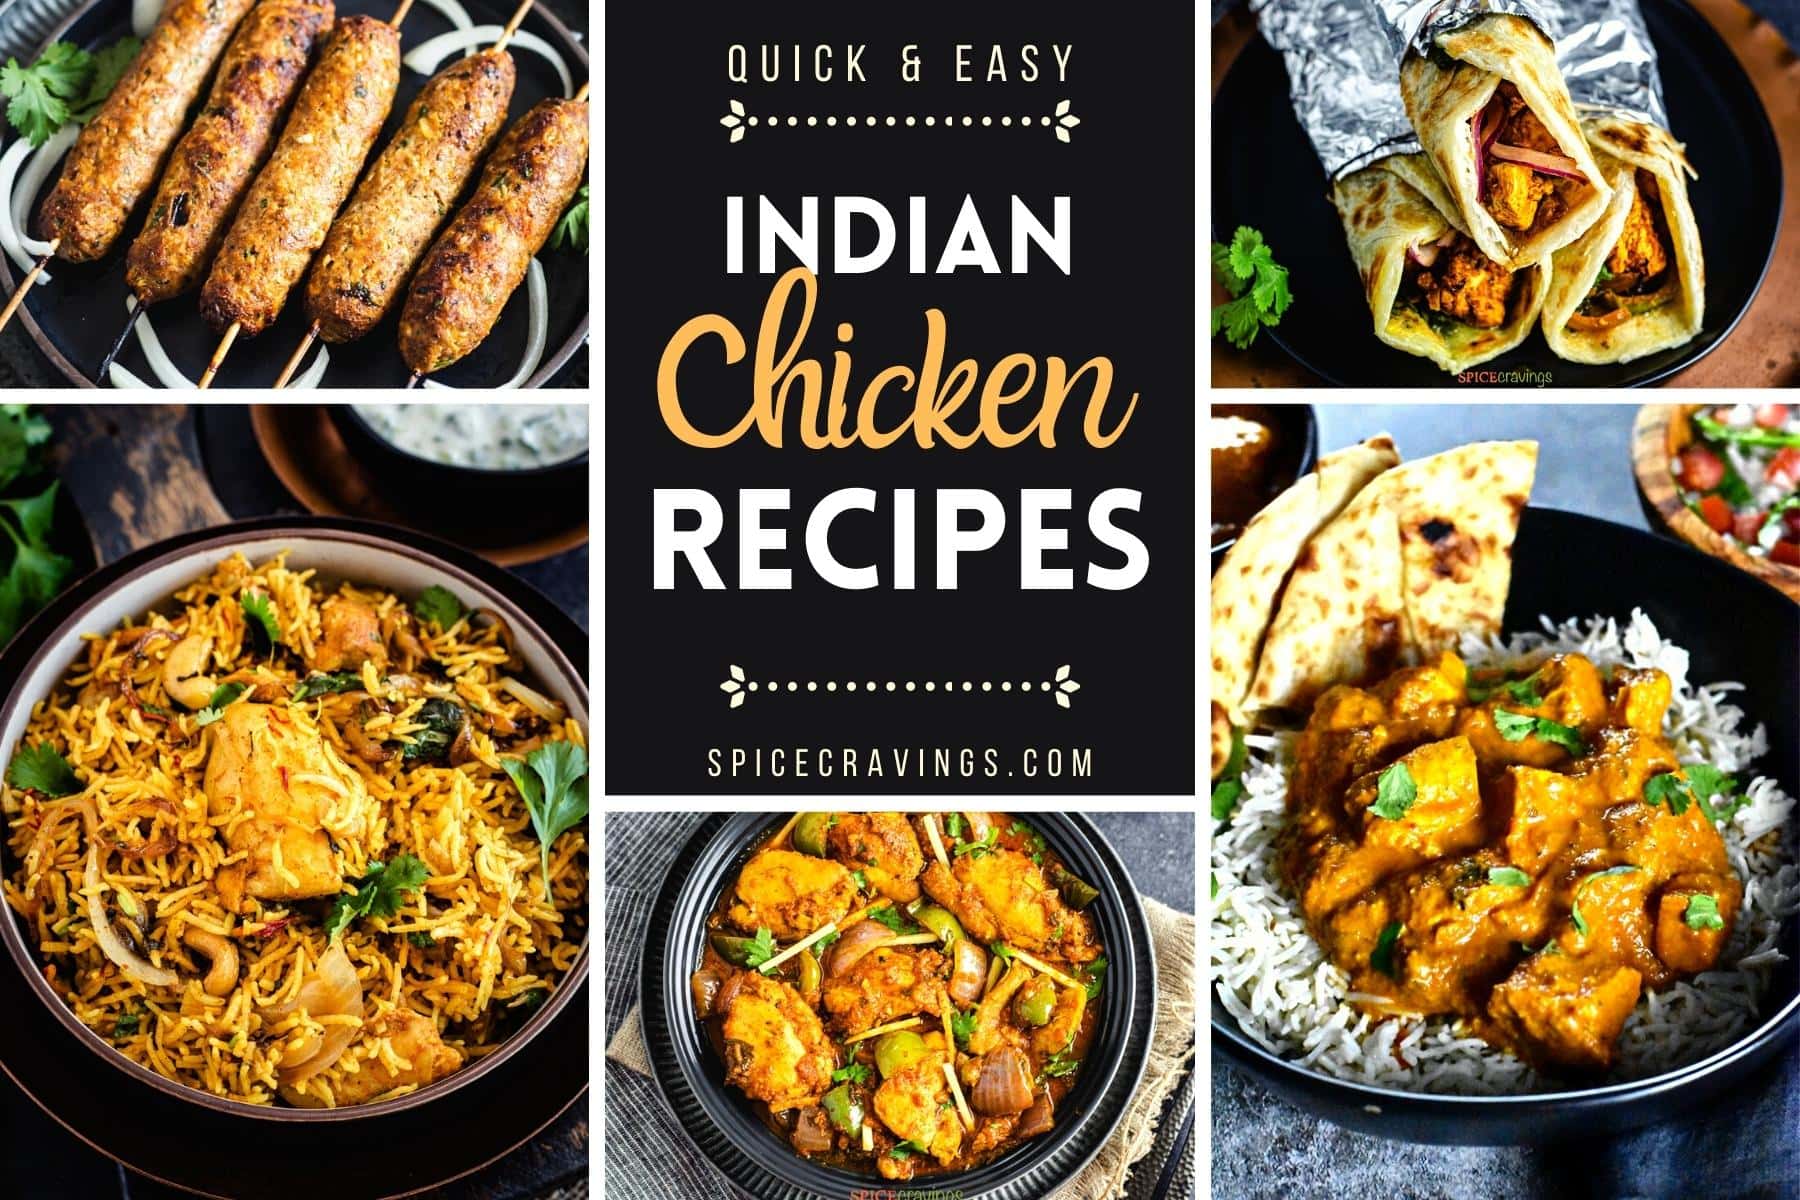 5-image grid of chicken recipes with title: Indian Chicken Recipes